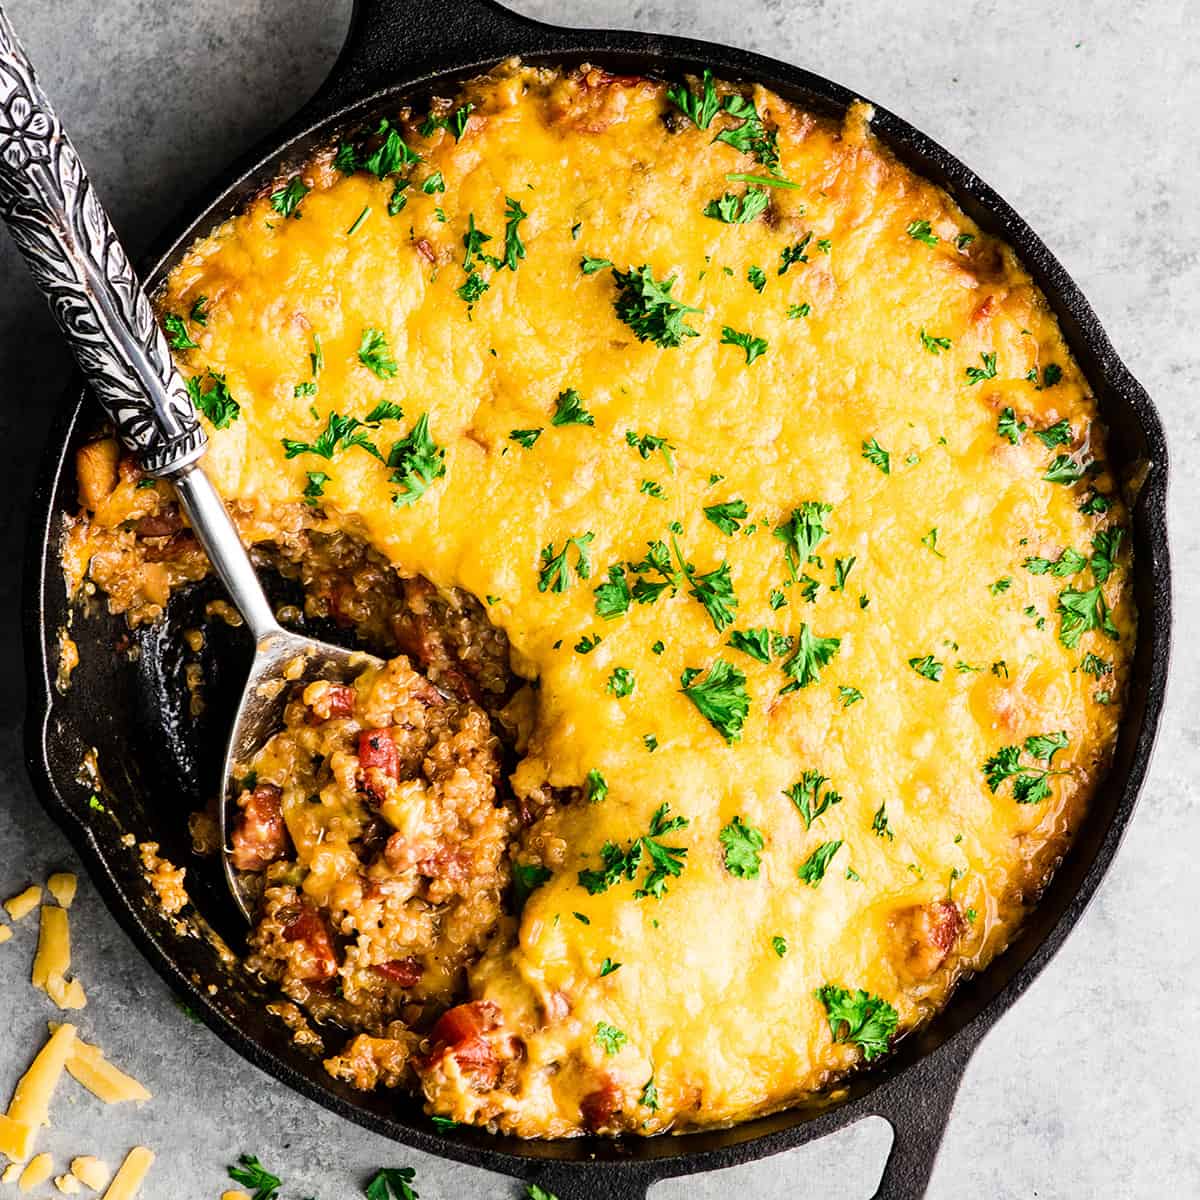 overhead view of baked quinoa casserole in a cast iron pan with a spoon taking a scoop out of it